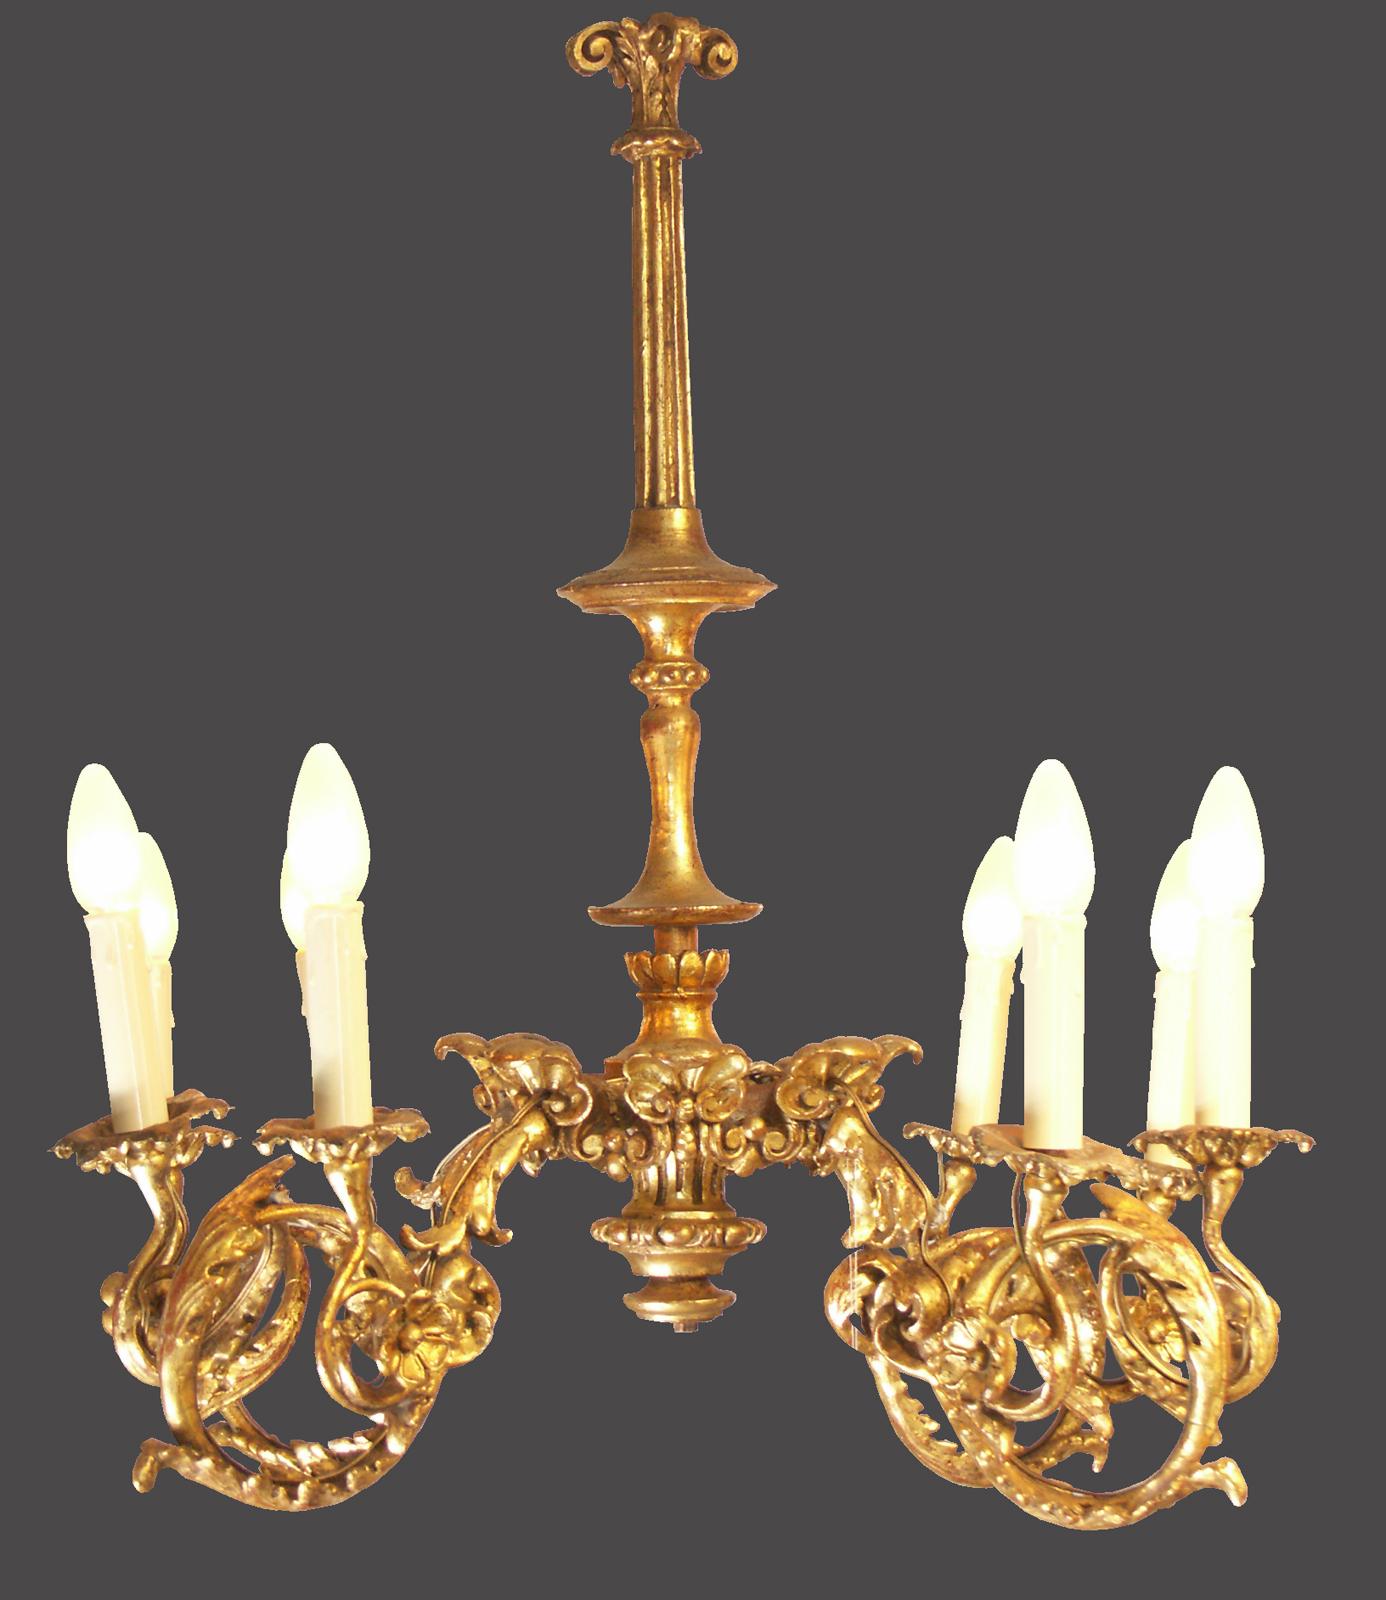 Hand-Crafted Wooden Carved/Gilded Baroque Chandelier, 1920s Original of the Time, Restored For Sale